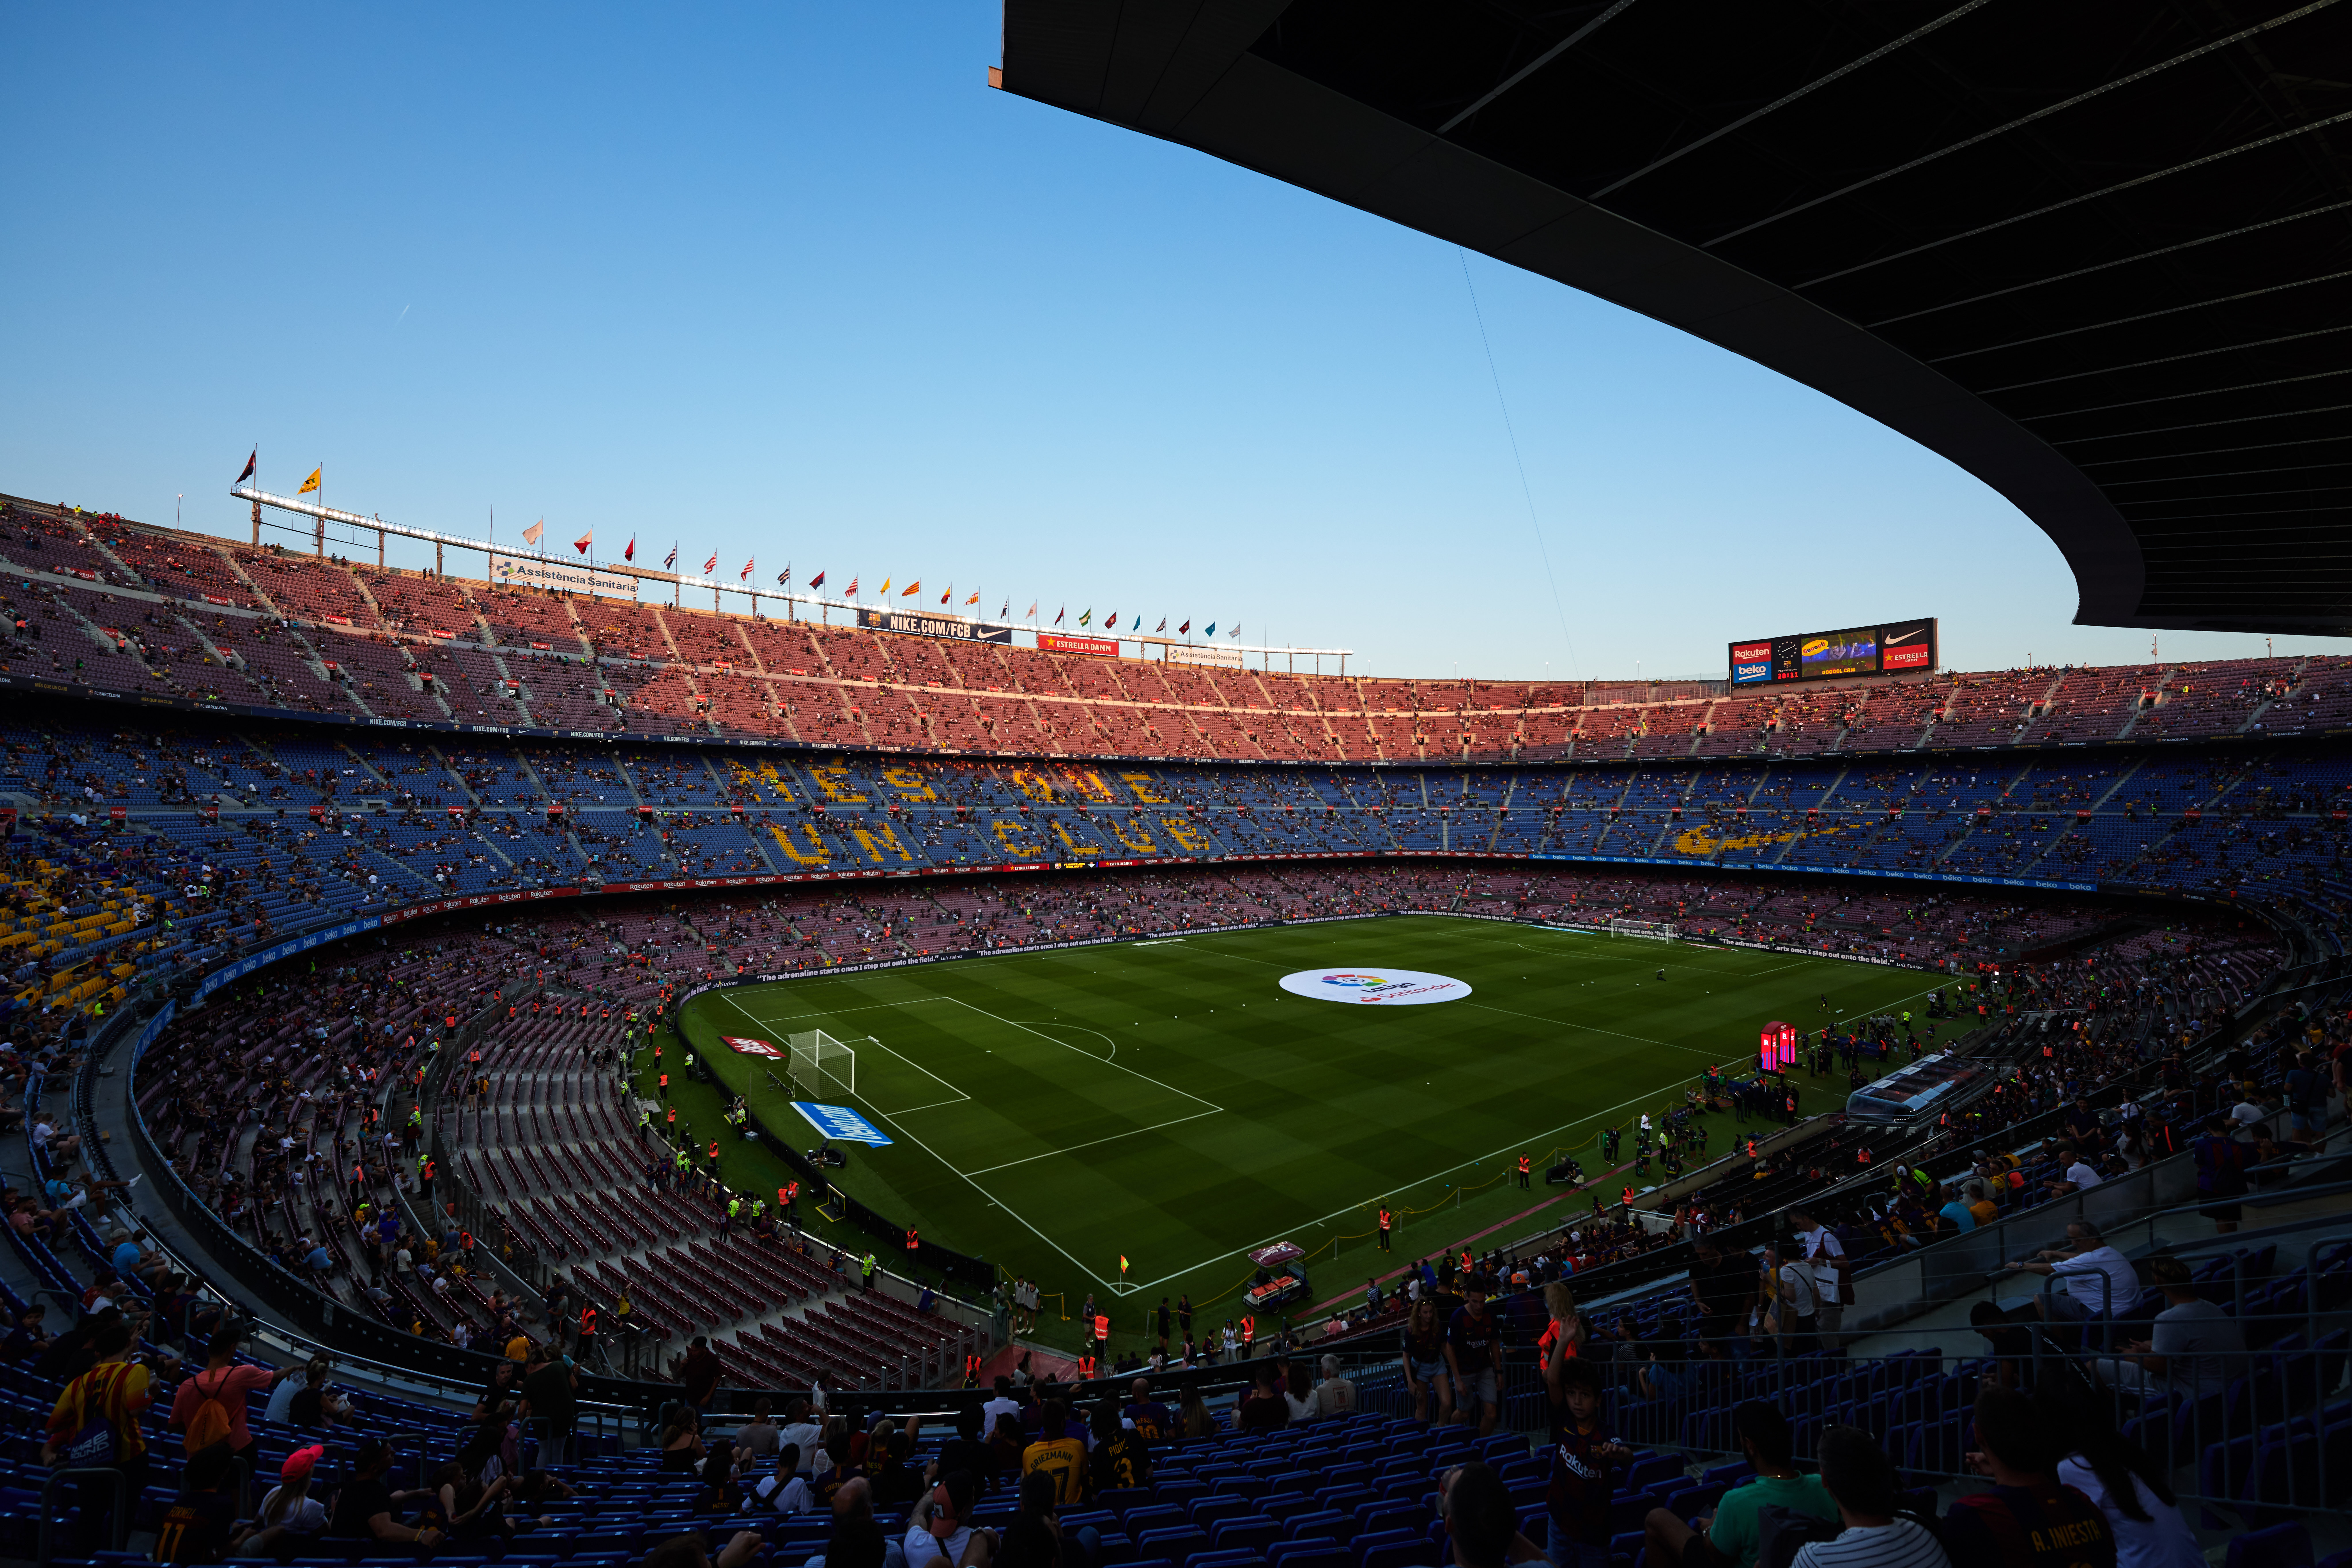 BARCELONA, SPAIN - AUGUST 25: A general view of the stadium before the Liga match between FC Barcelona and Real Betis Balompie at Camp Nou on August 25, 2019 in Barcelona, Spain. (Photo by Alex Caparros/Getty Images)